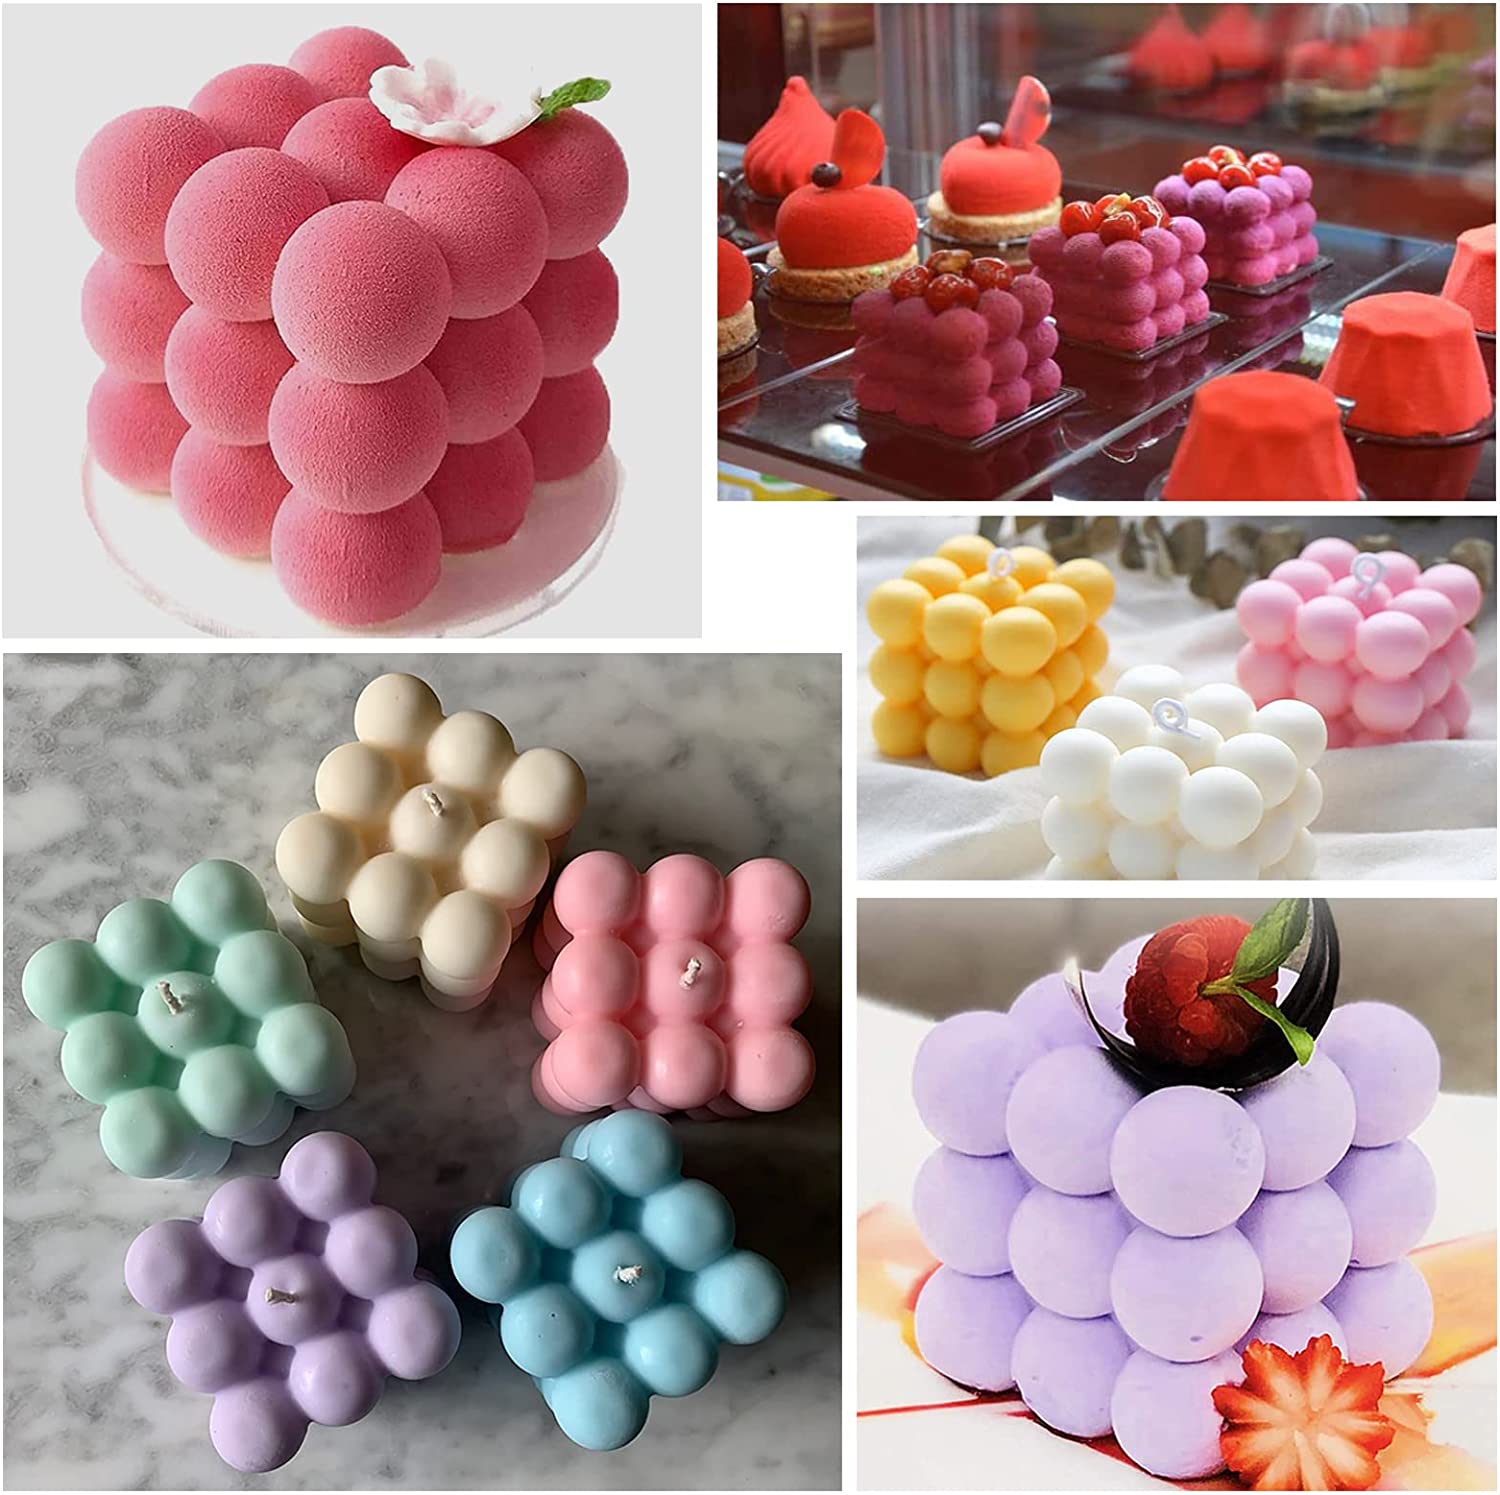 15 Cavity Bubble Candle Mold, Very Cute Silicone Mold with 3 Meter Wick  Roll Included for Candle Making, Soap Mold for Soap Making